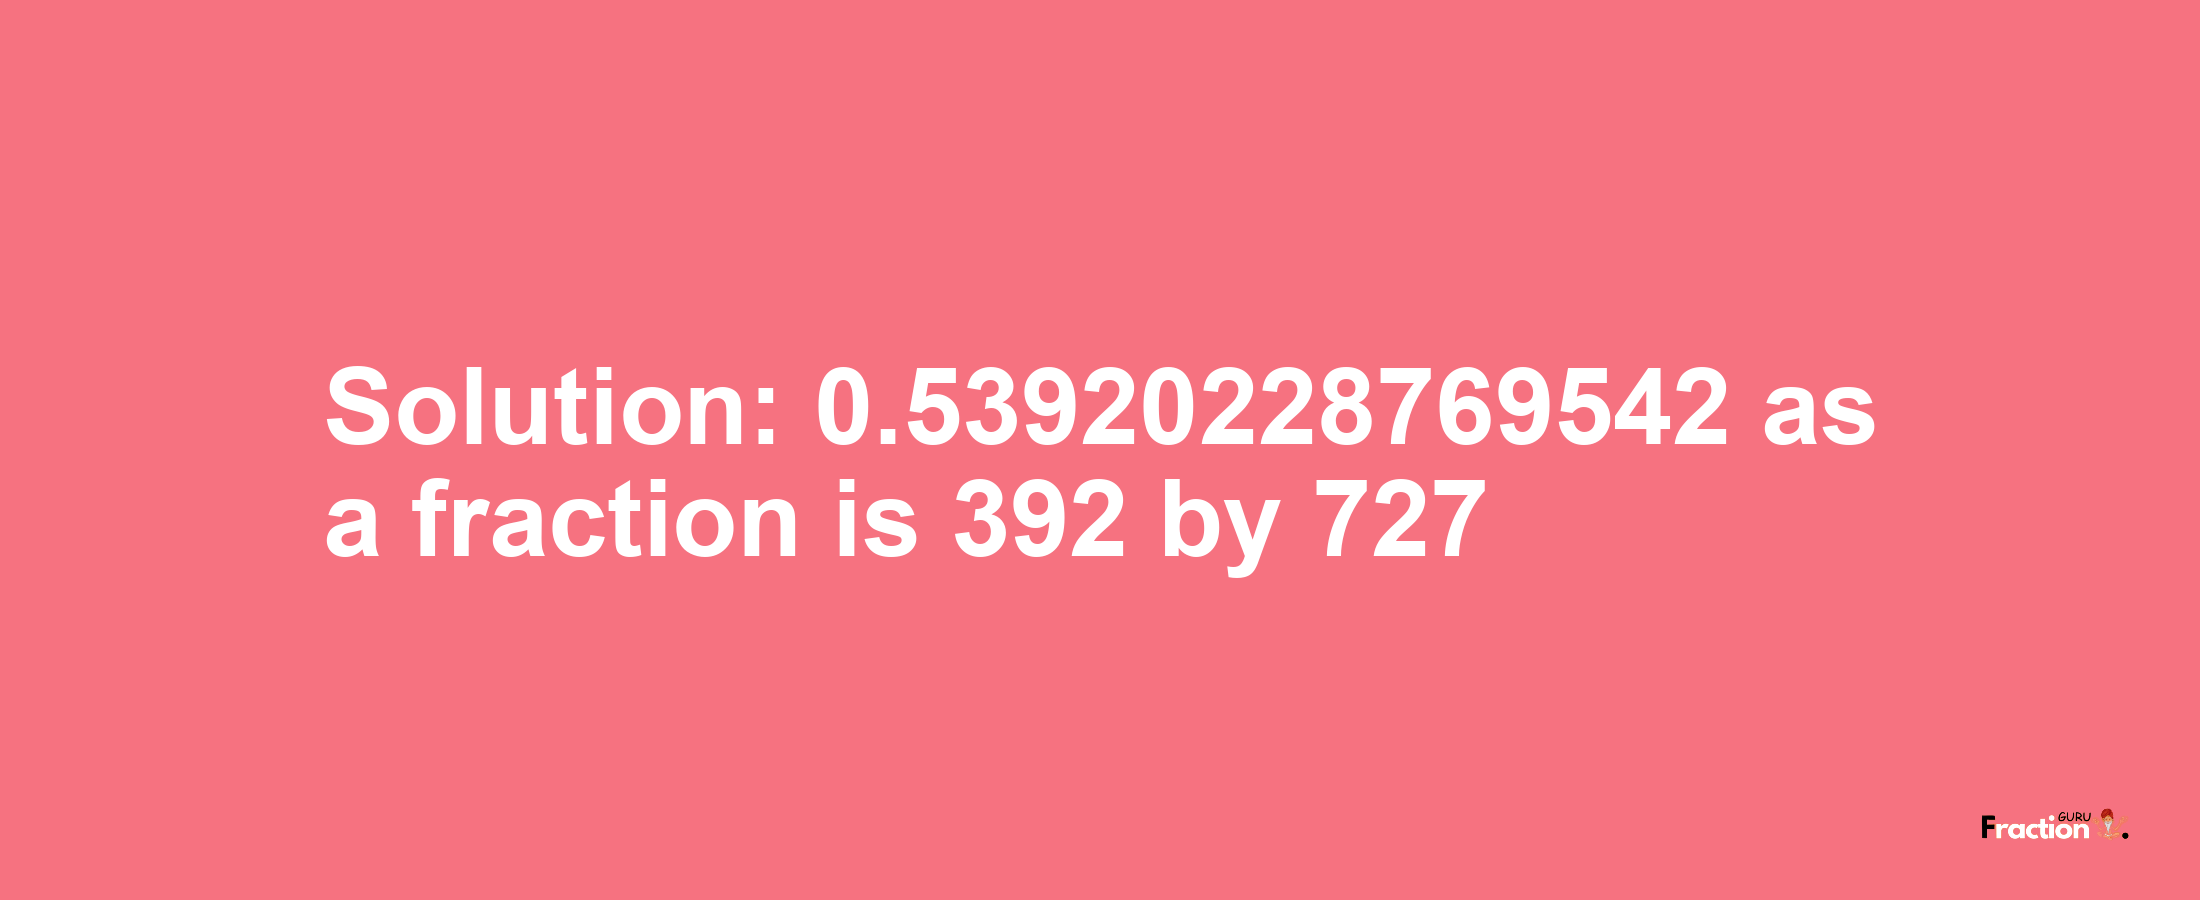 Solution:0.53920228769542 as a fraction is 392/727